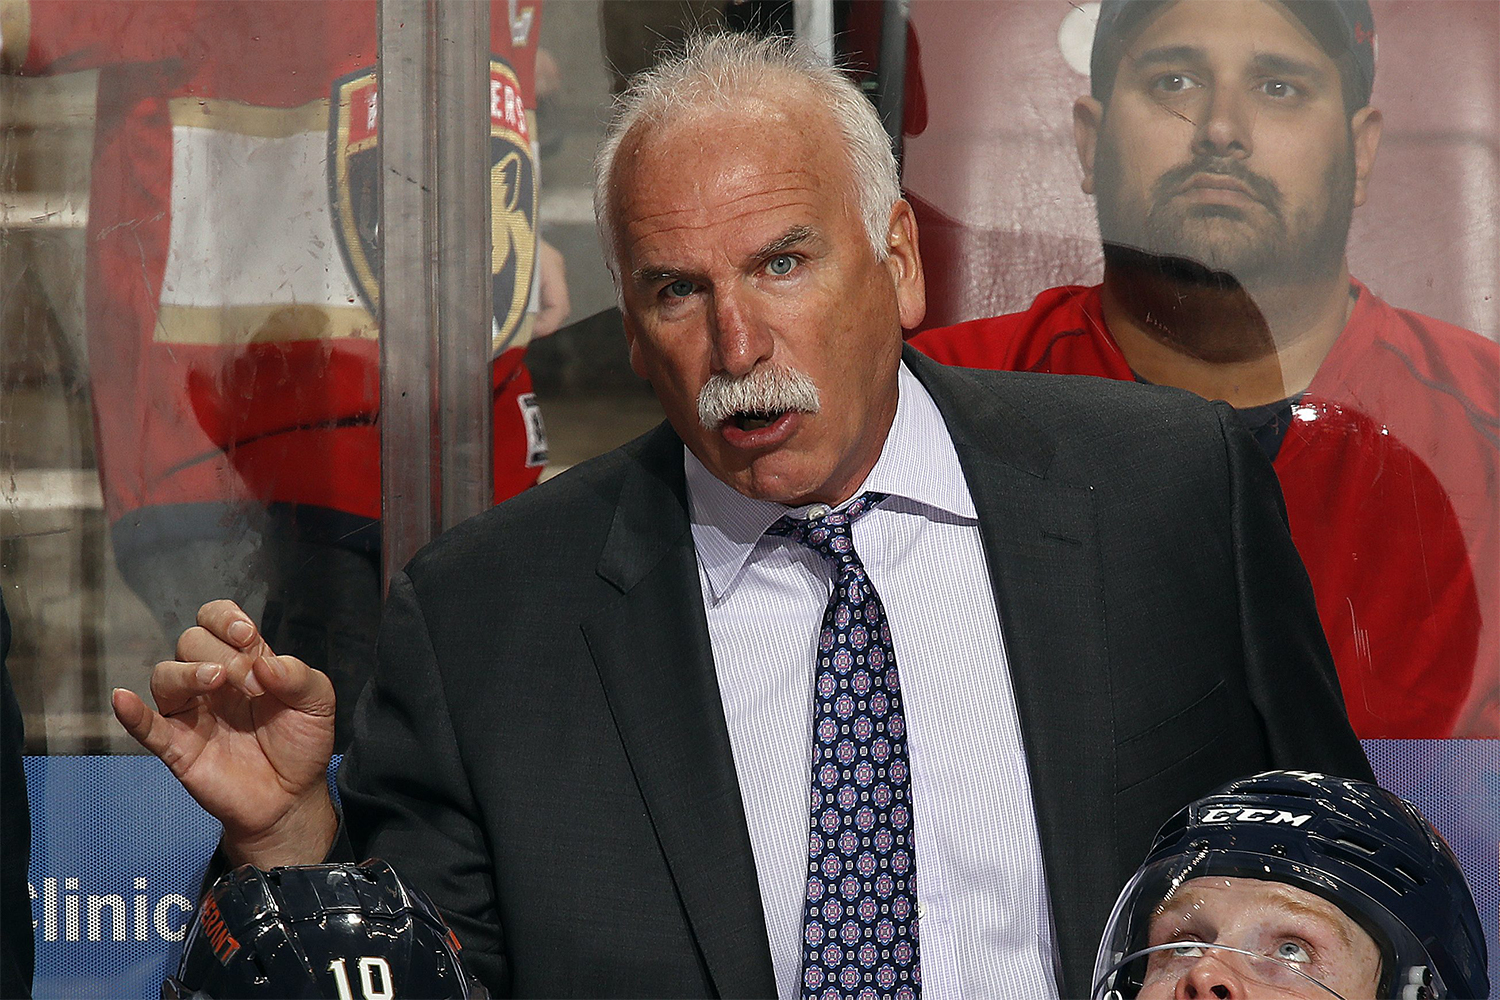 Florida Panthers head coach Joel Quenneville during a game wearing a suit and tie and sporting a white mustache